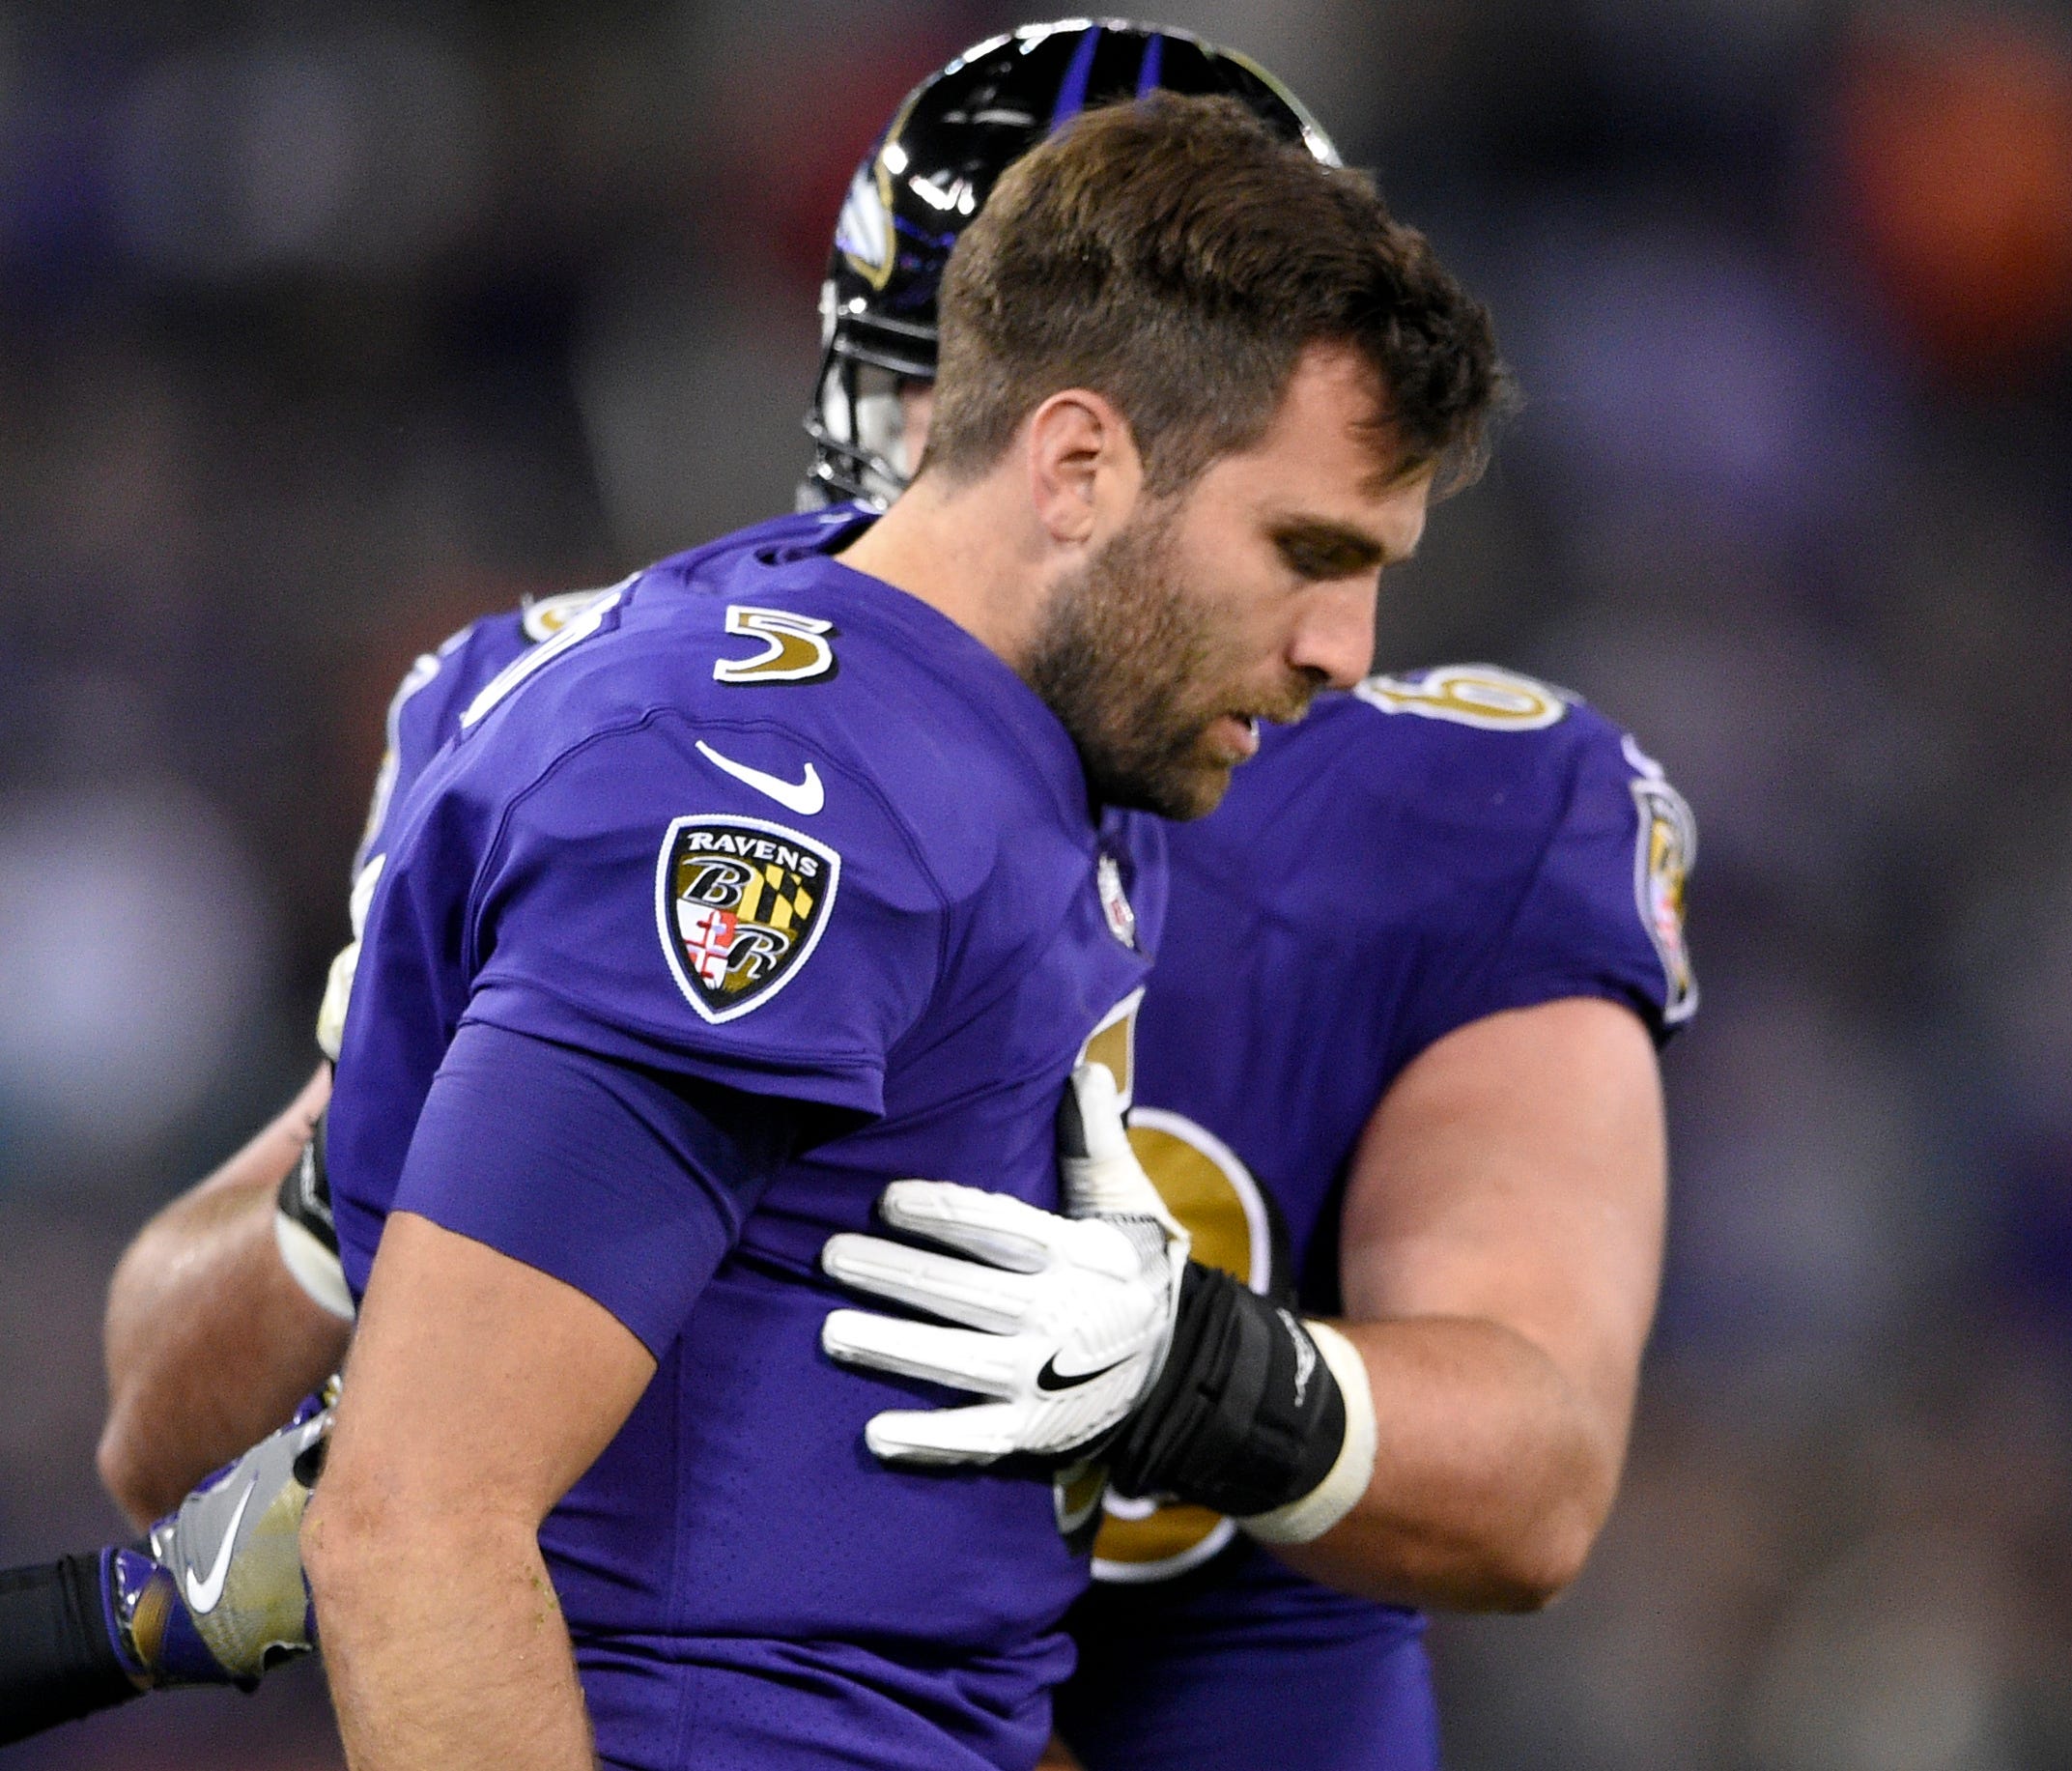 Baltimore Ravens quarterback Joe Flacco, right, is assisted off the field after being tackled by Miami Dolphins middle linebacker Kiko Alonso in the first half of an NFL football game, Thursday, Oct. 26, 2017, in Baltimore.